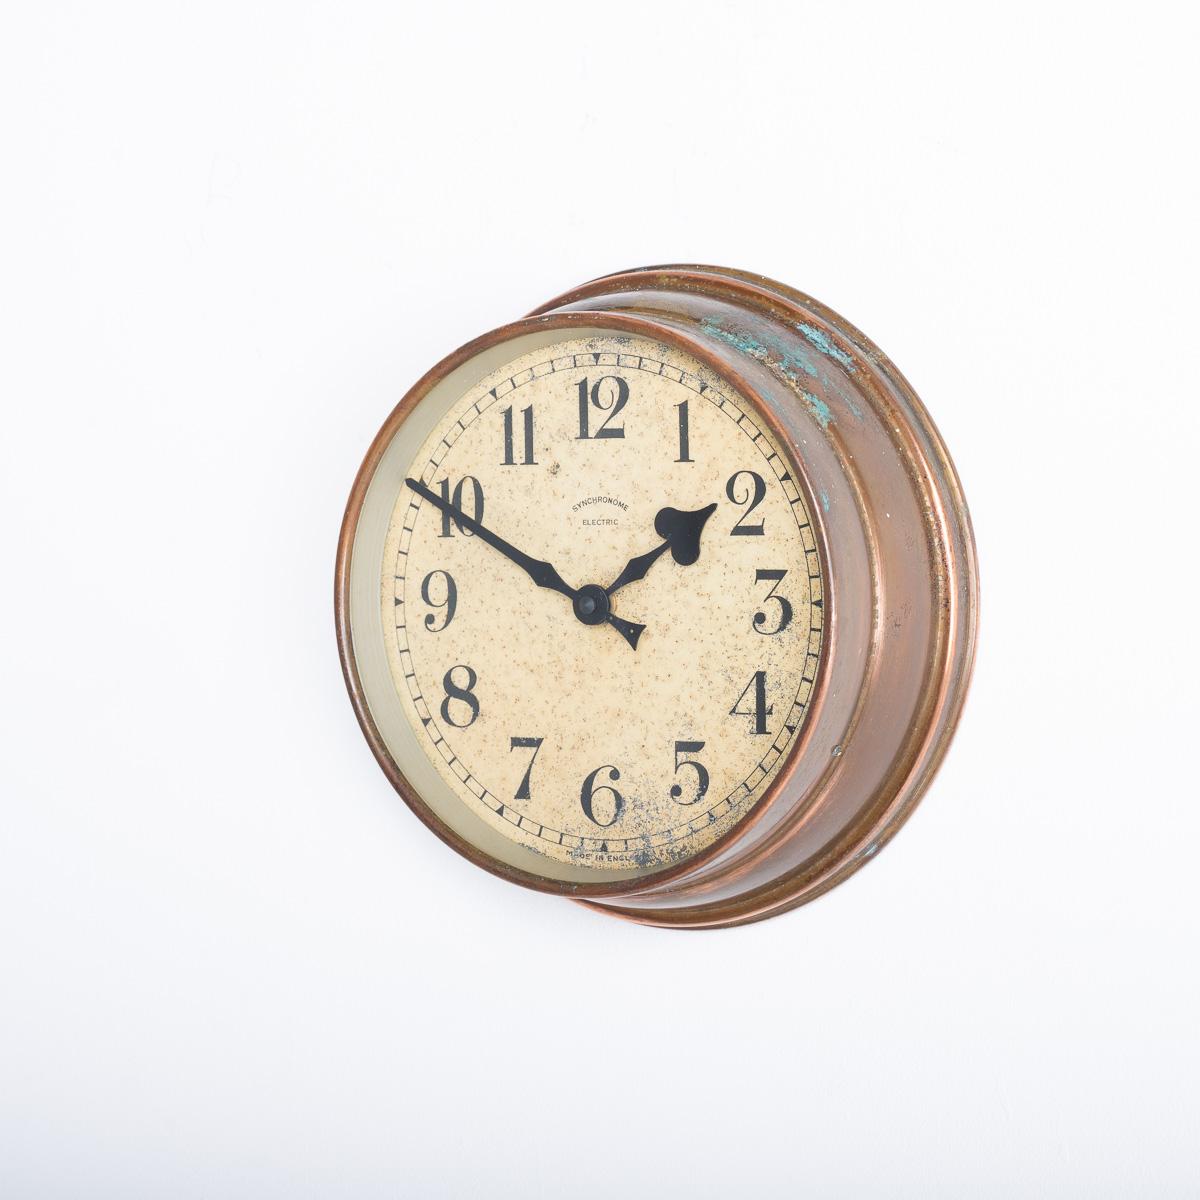 British Small Vintage Industrial Copper Wall Clock by Synchronome